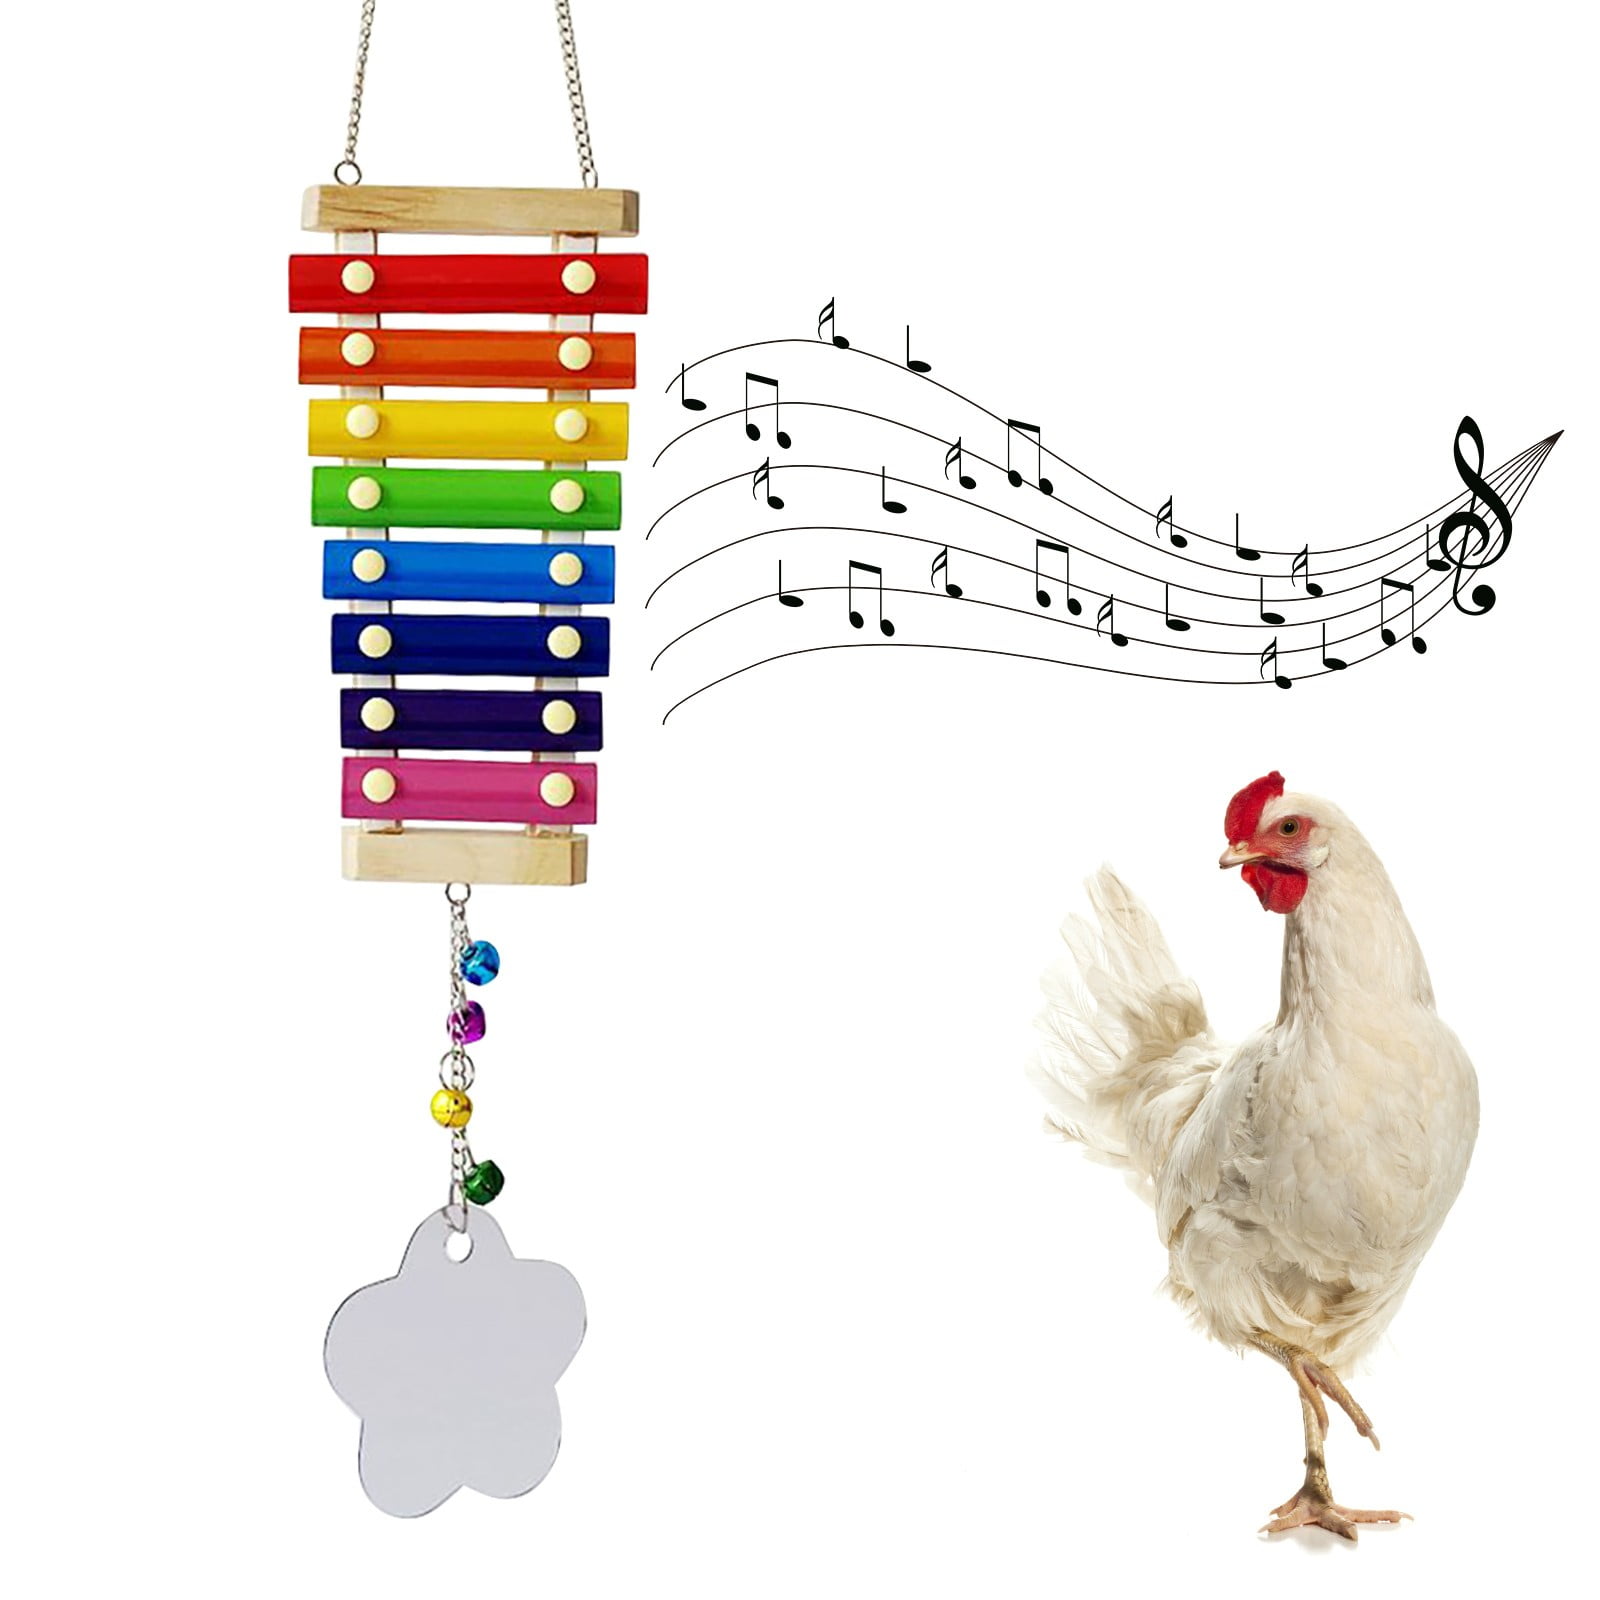 Double Suspensible Wood Xylophone Toy with 8 Metal Keys Chicken Coop Pecking Toy with Grinding Stone No/Brand PD Chicken Xylophone Toy for Hens 